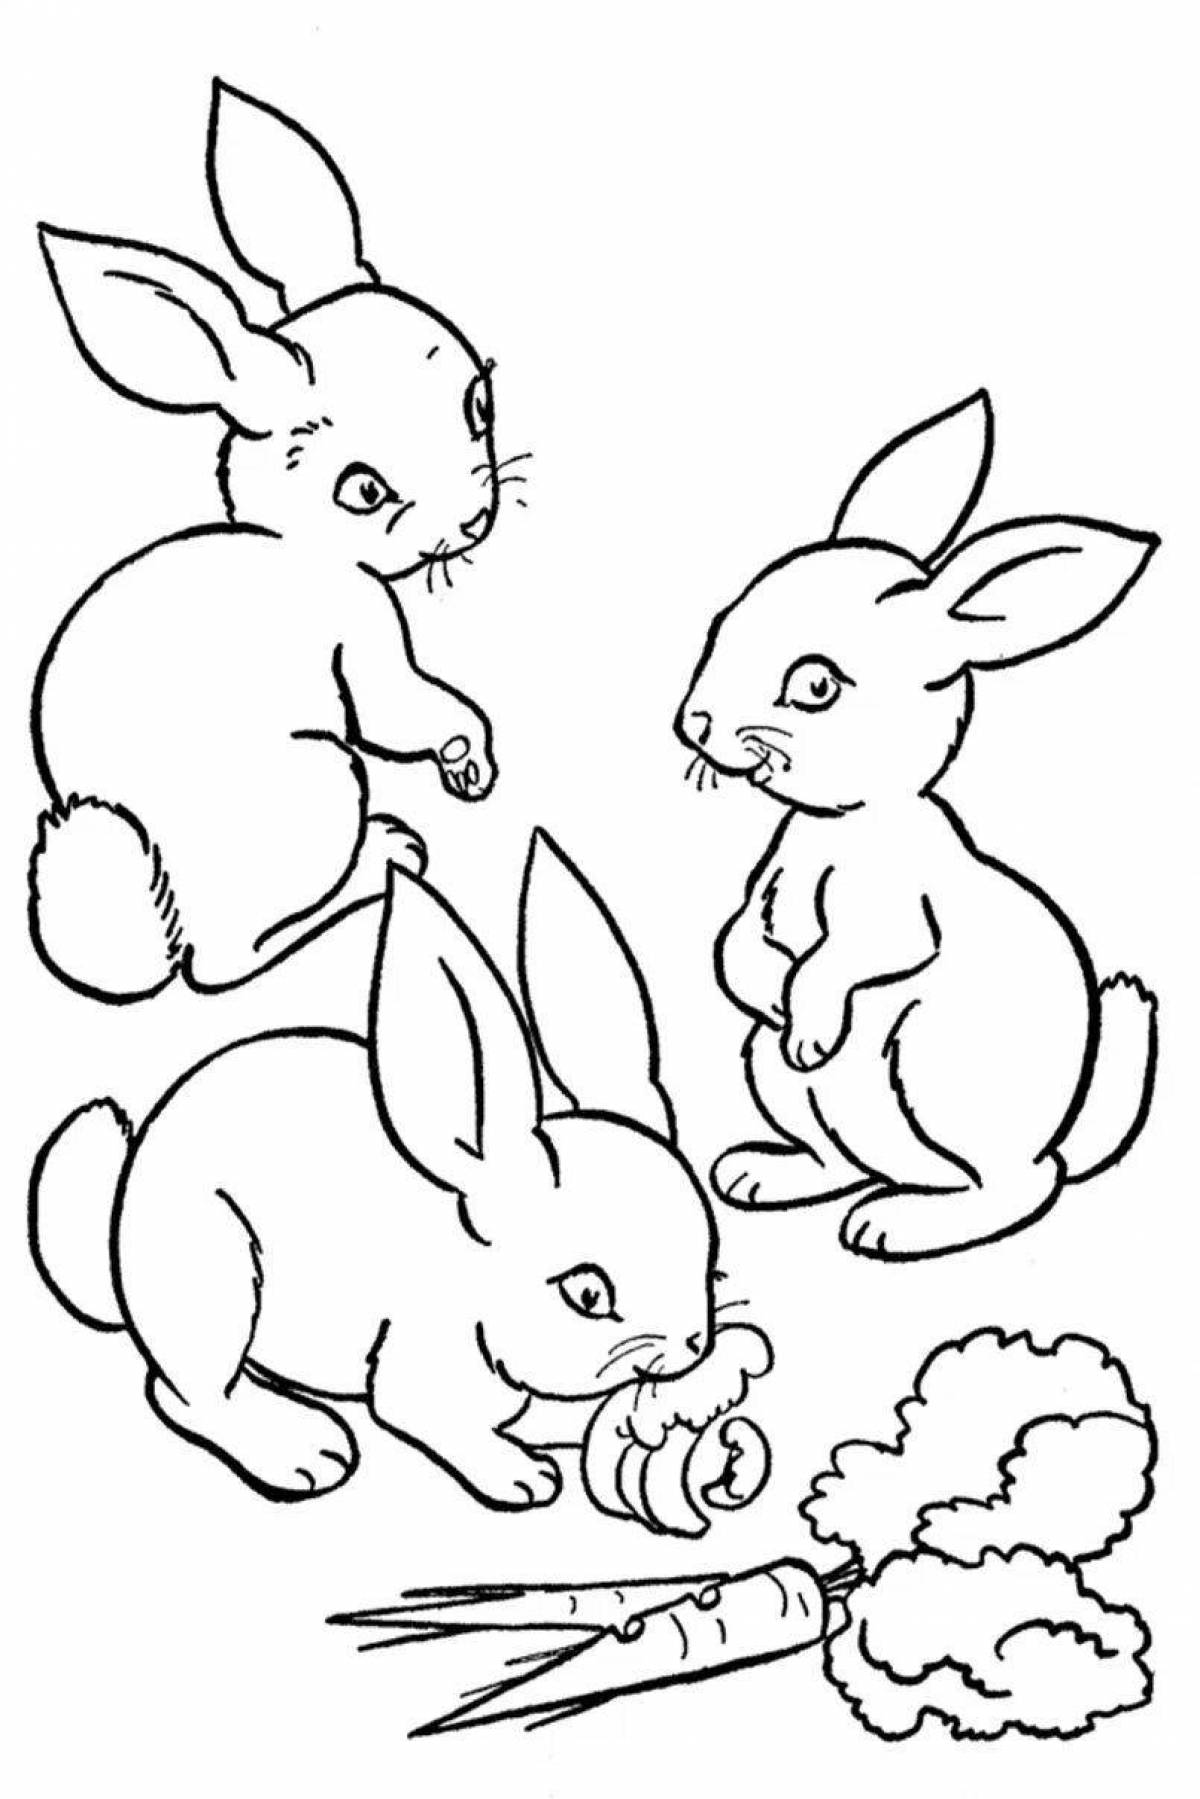 Colorful Bunny Hare Coloring Page